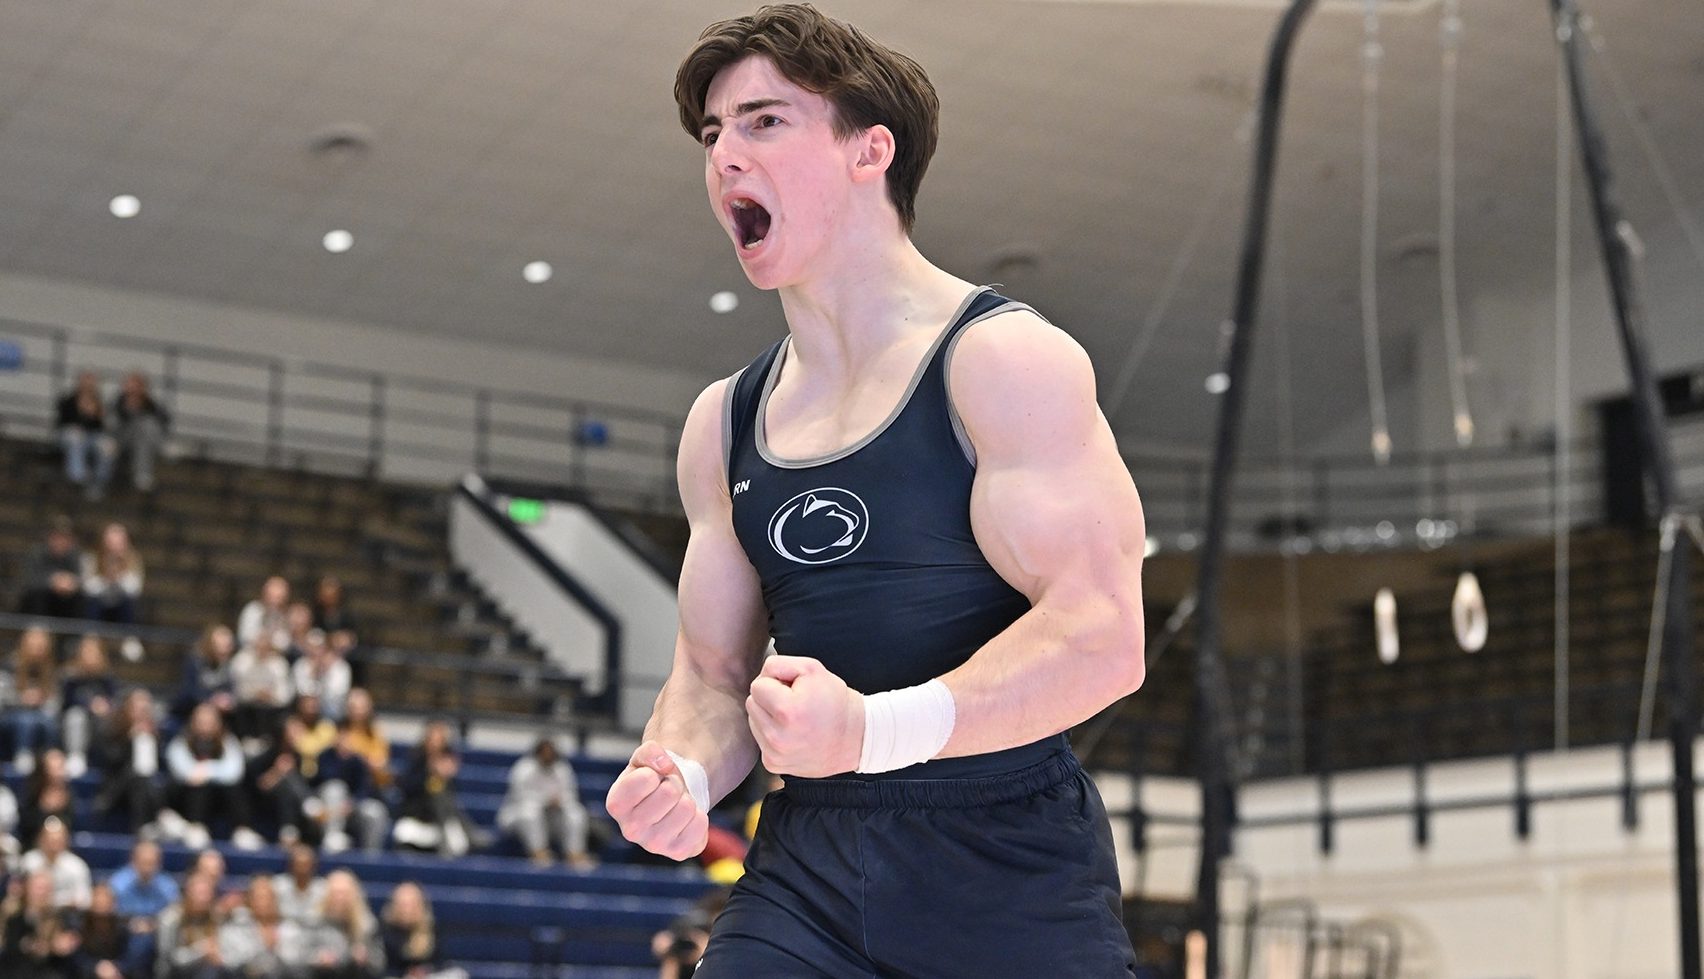 Penn State’s Matt Cormier celebrates after a routine against Michigan.